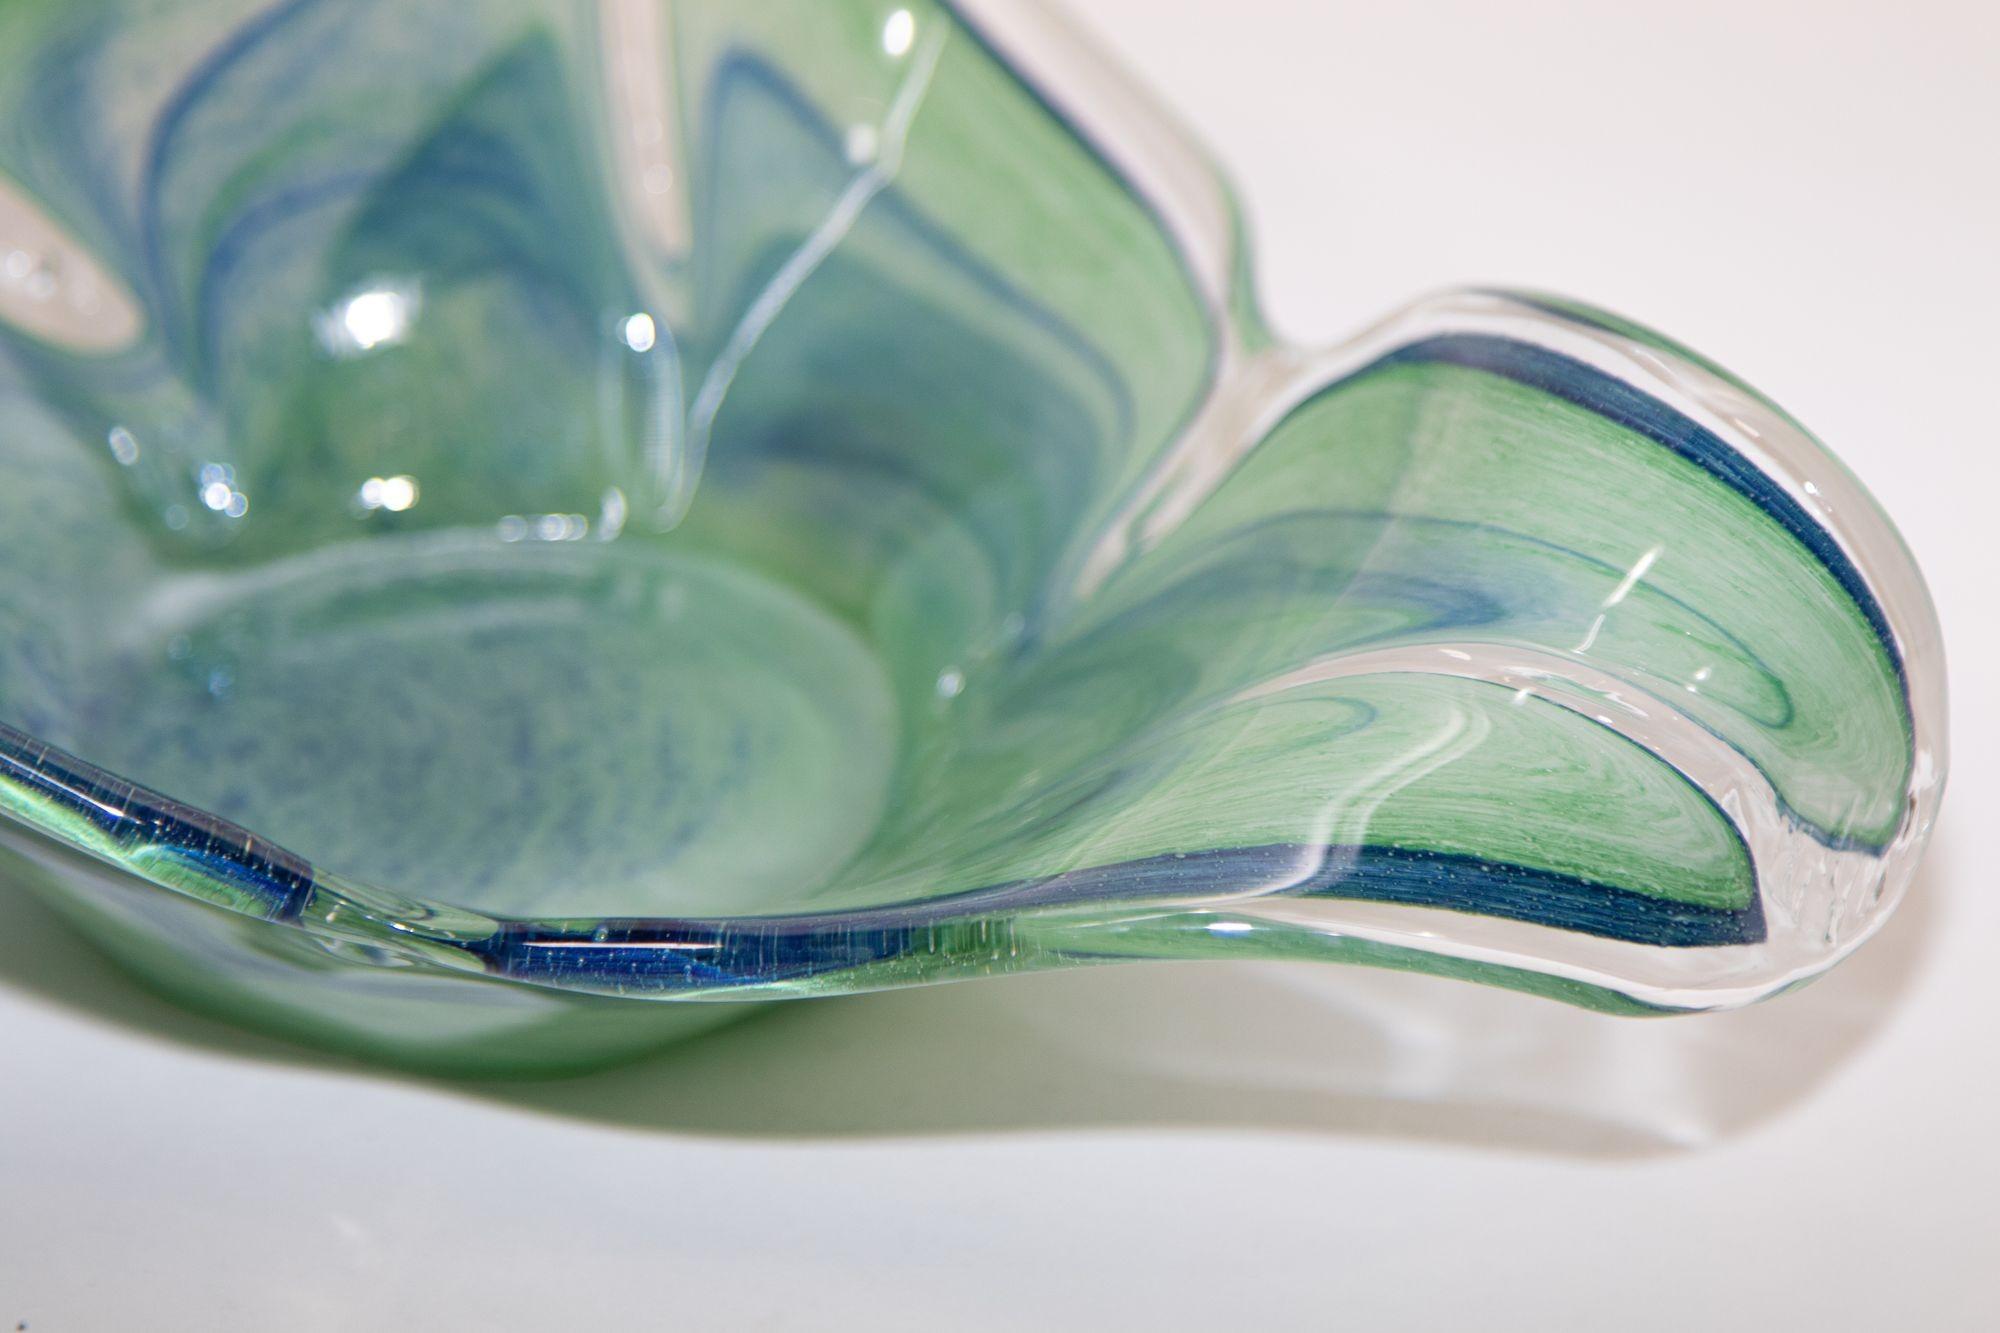 Large Murano art glass blue, green, teal decorative bowl in the shape of a three petals flower.
Great size, use it as a decorative Bowl, candleholder, Candy Dish.
Very unusual design free form hand blown bowl.
Hand crafted Murano blown glass,